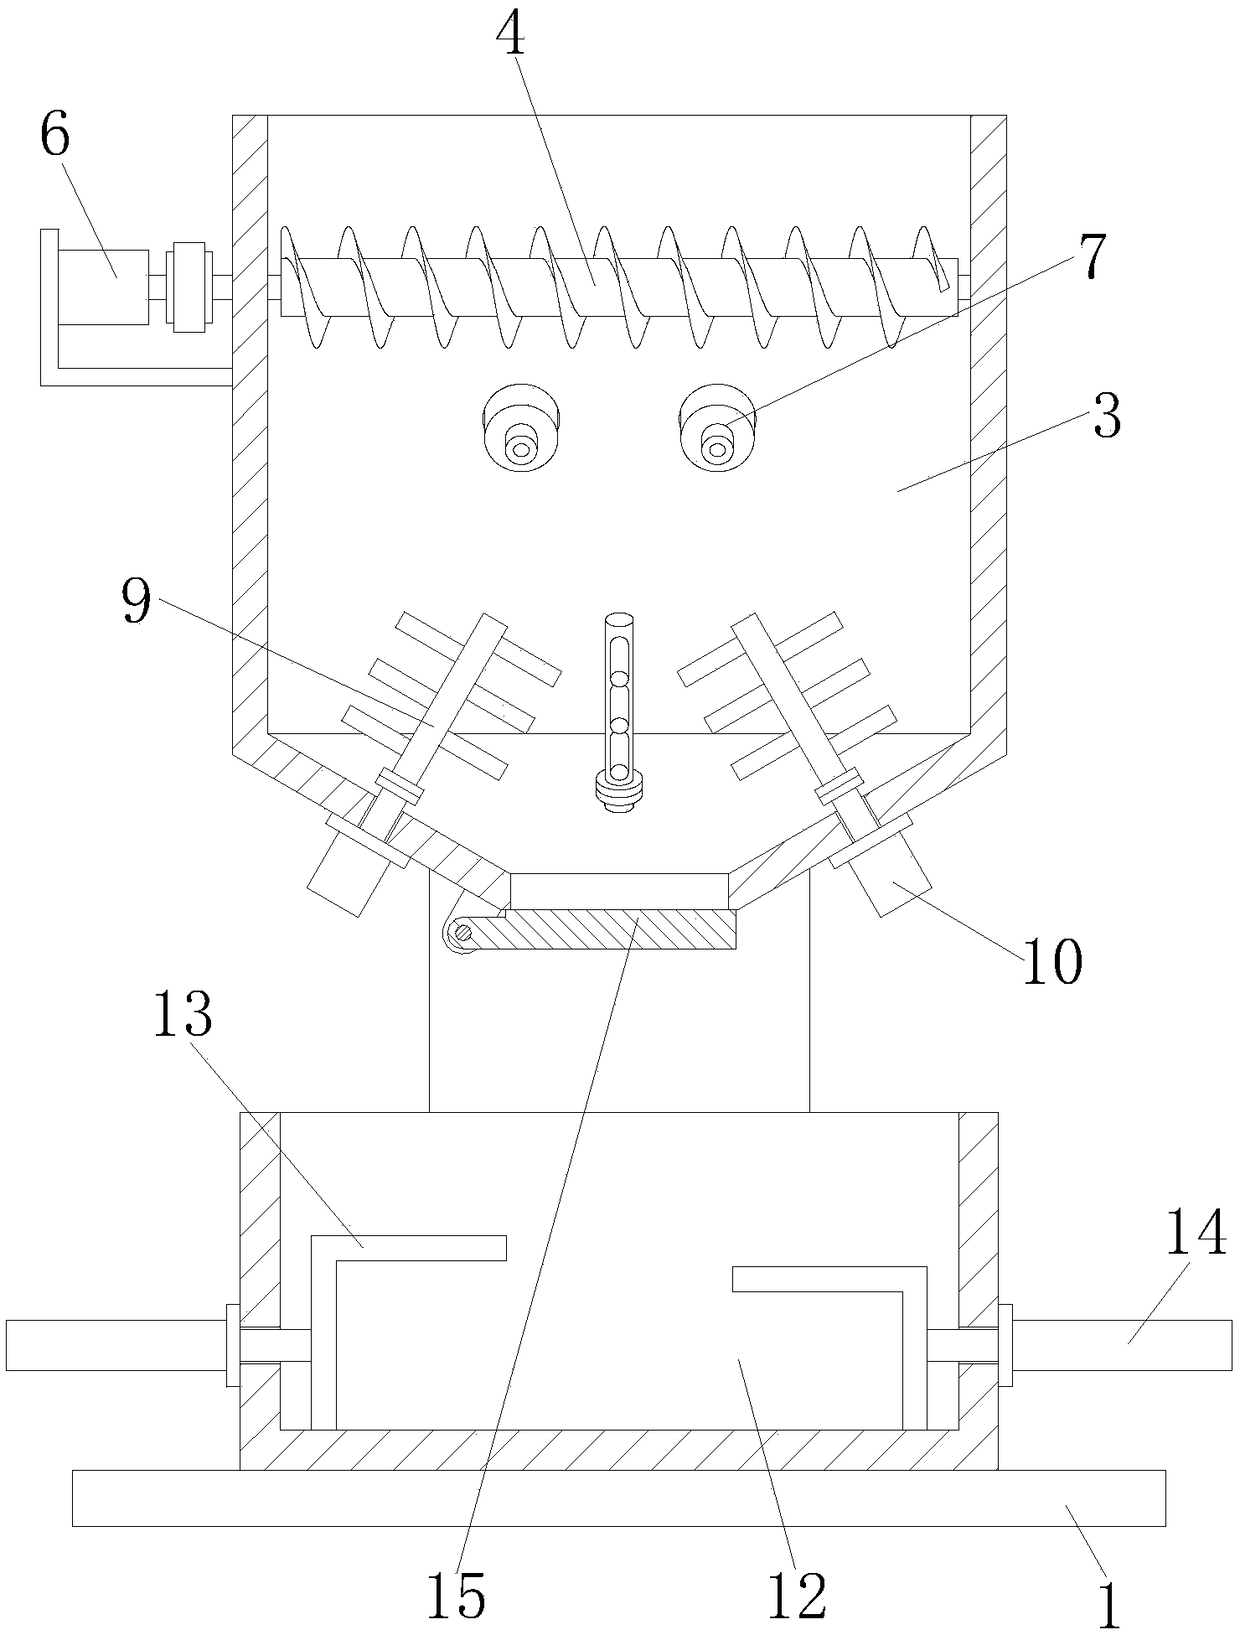 Wheat straw crushing and compressing device